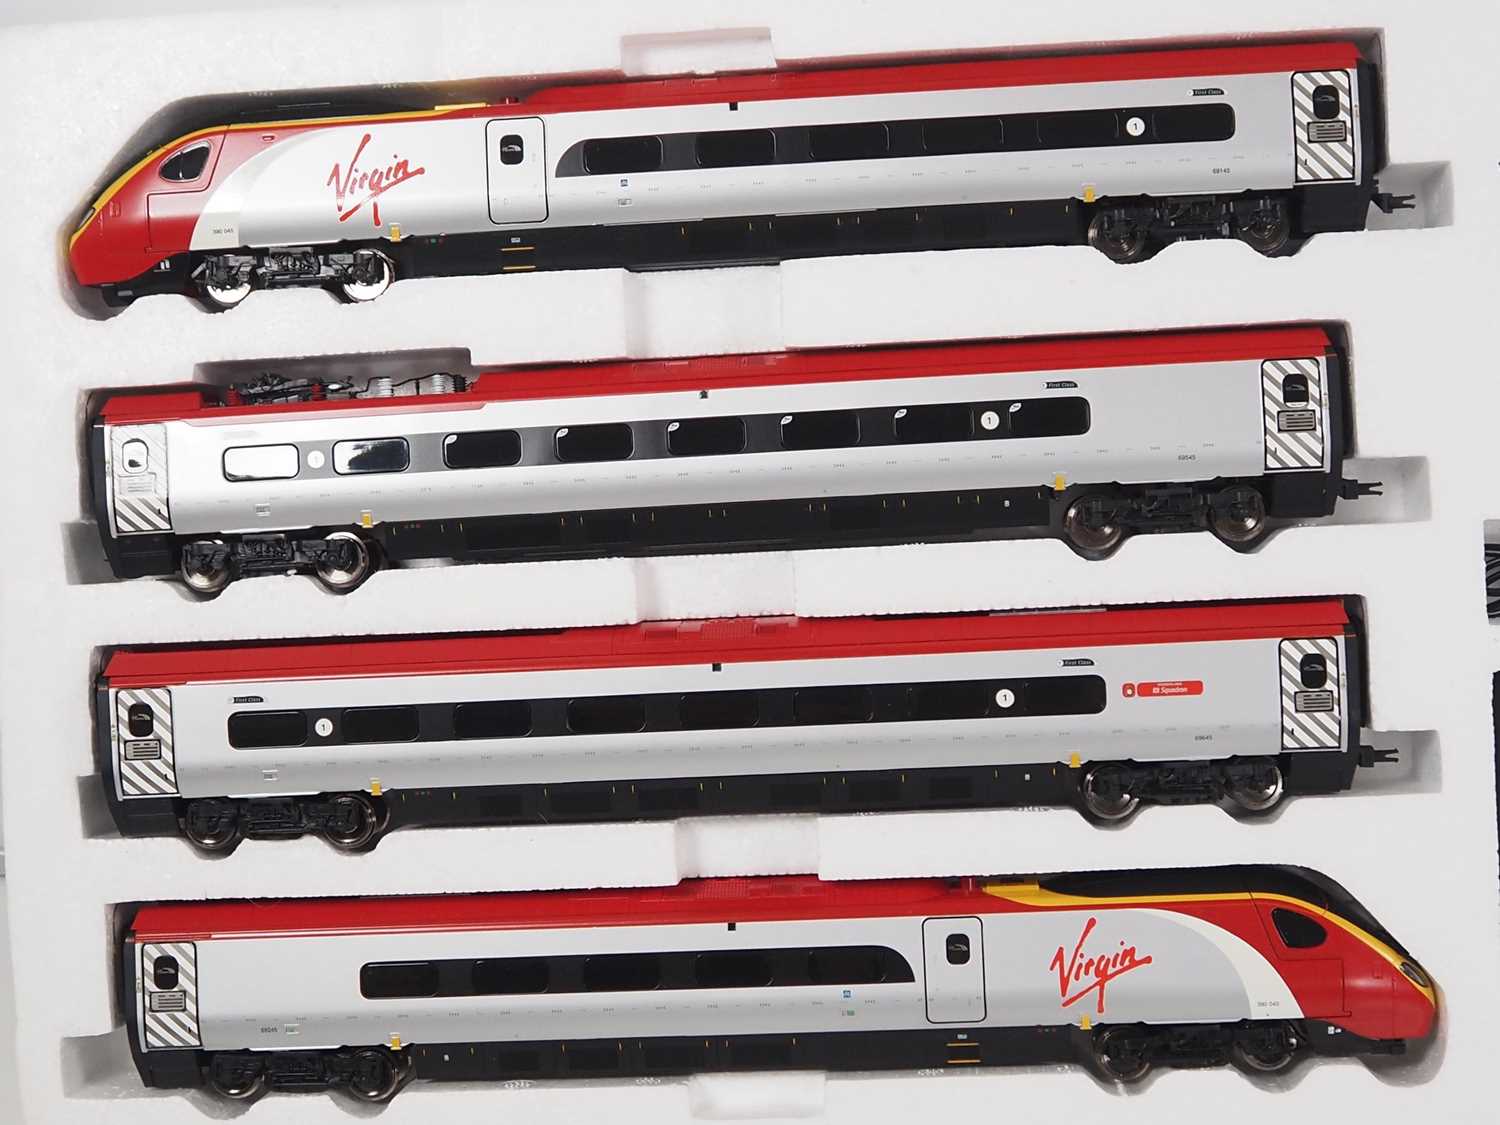 A HORNBY R1134 OO gauge 'Virgin Trains Pendolino' train set comprising a 4-car train and track, - Image 3 of 7